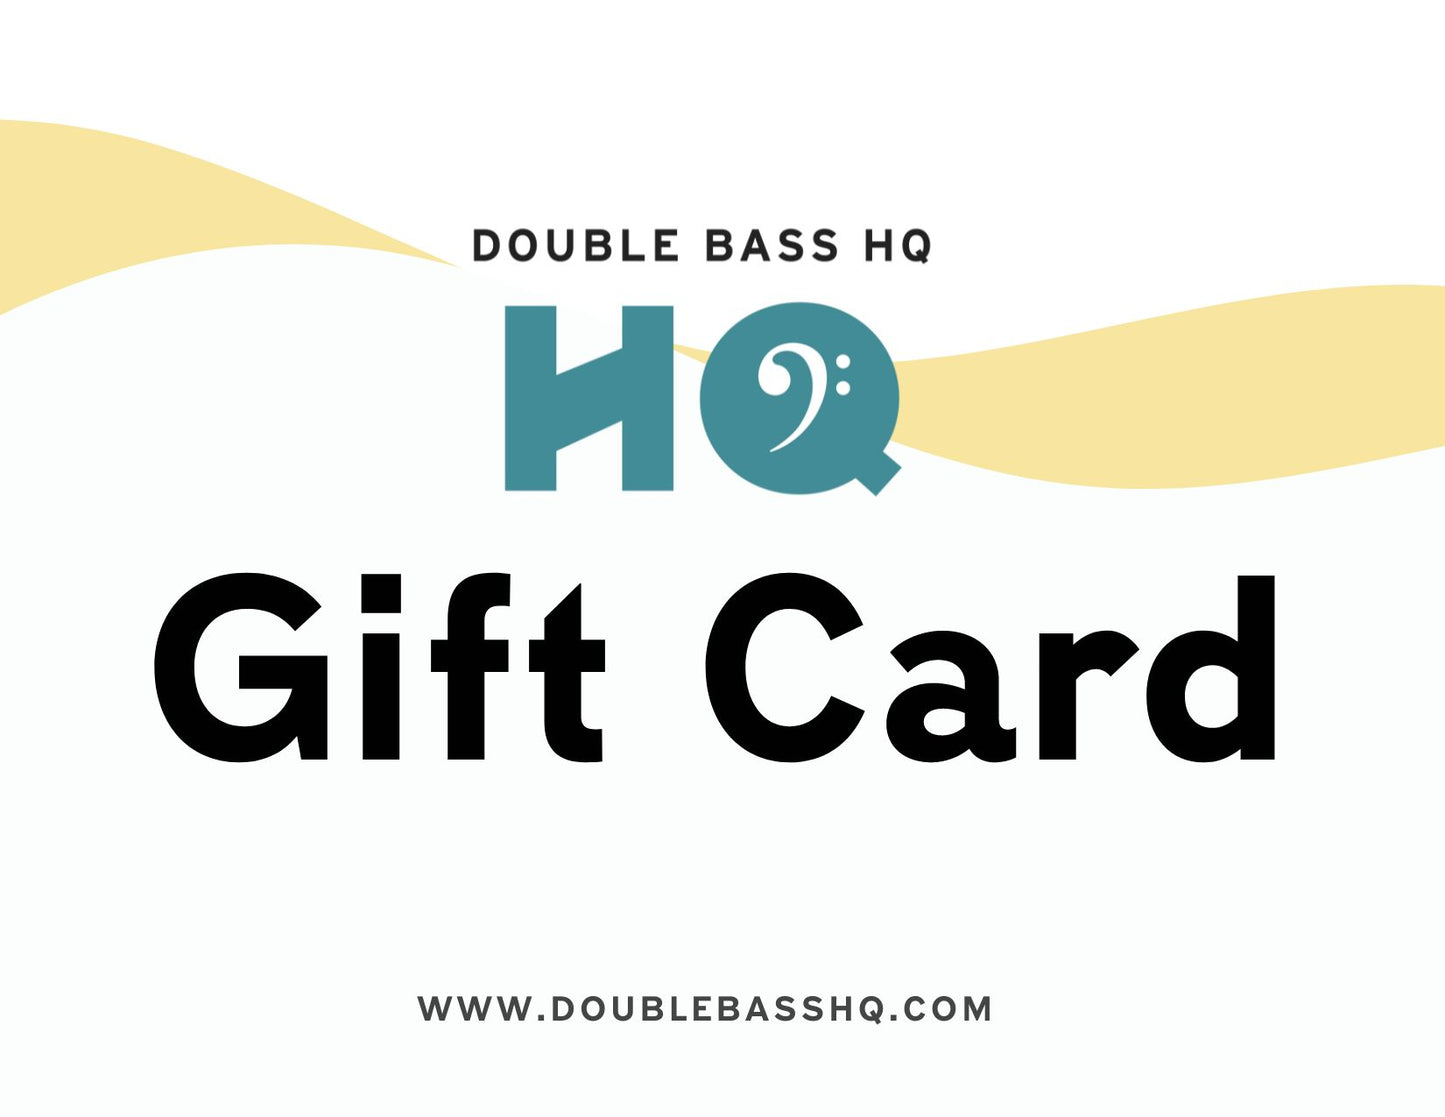 Double Bass HQ Gift Card